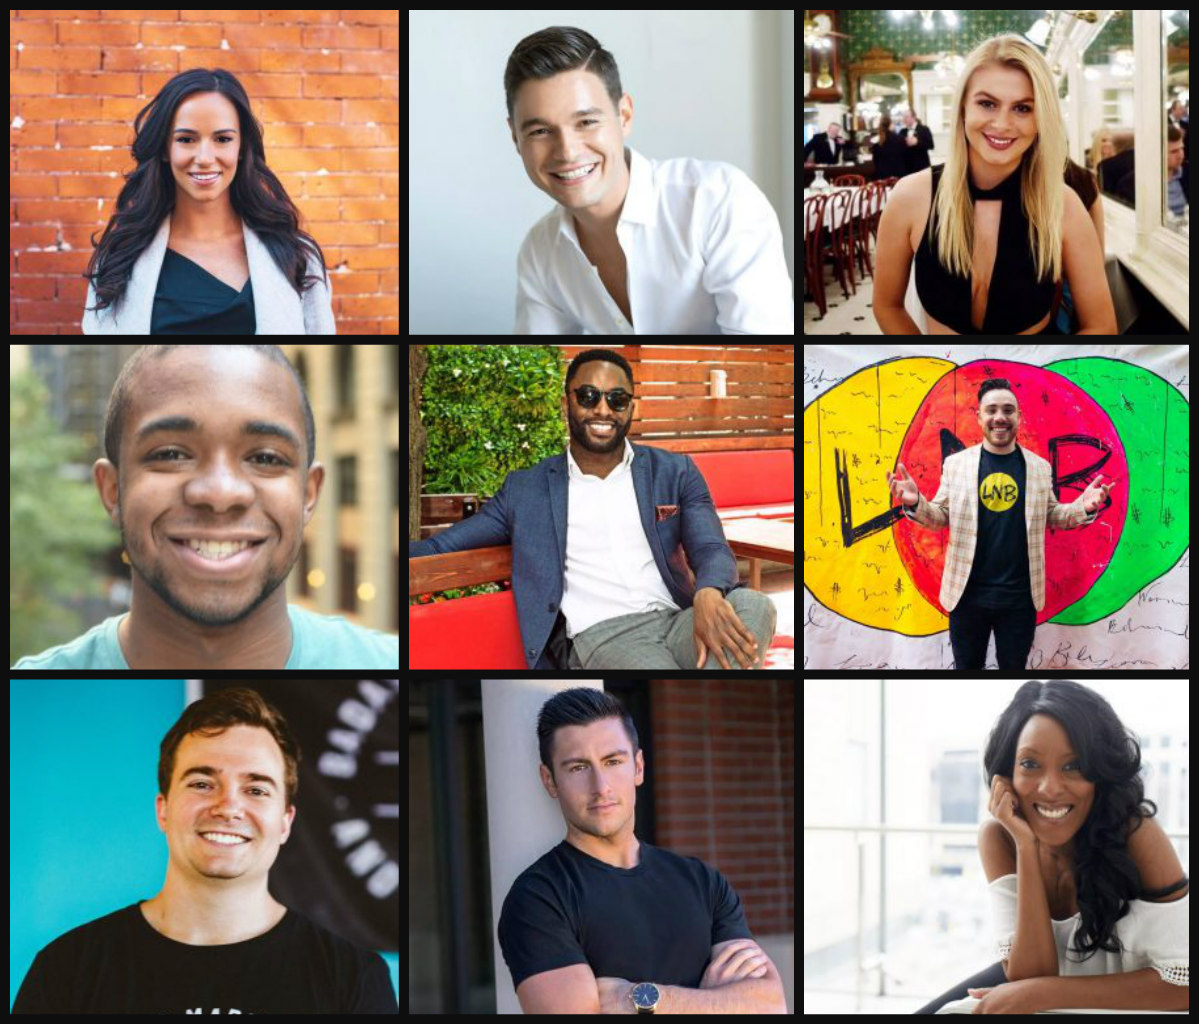 These Are New Theory’s Top 40 Millennial Influencers to Watch in 2018